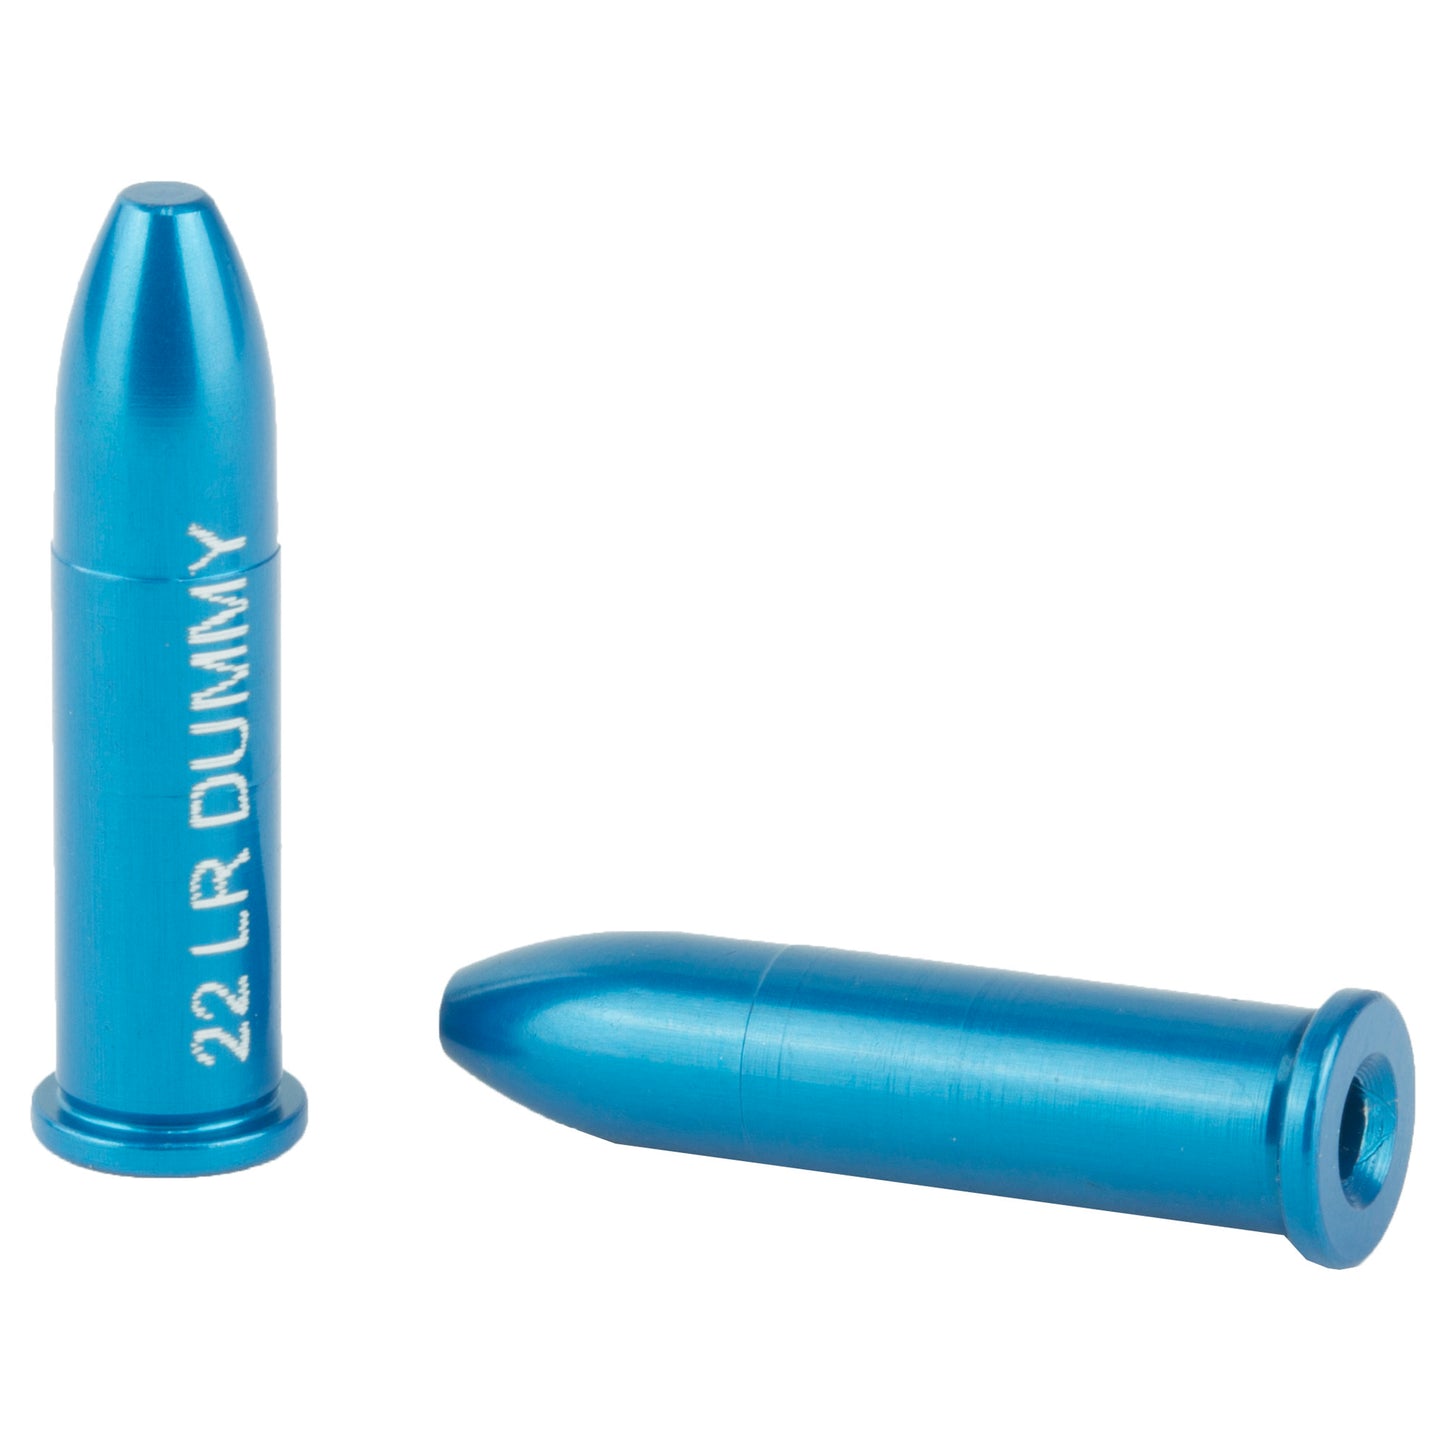 A-Zoom .22lr Dummy Rds (6 Pack)